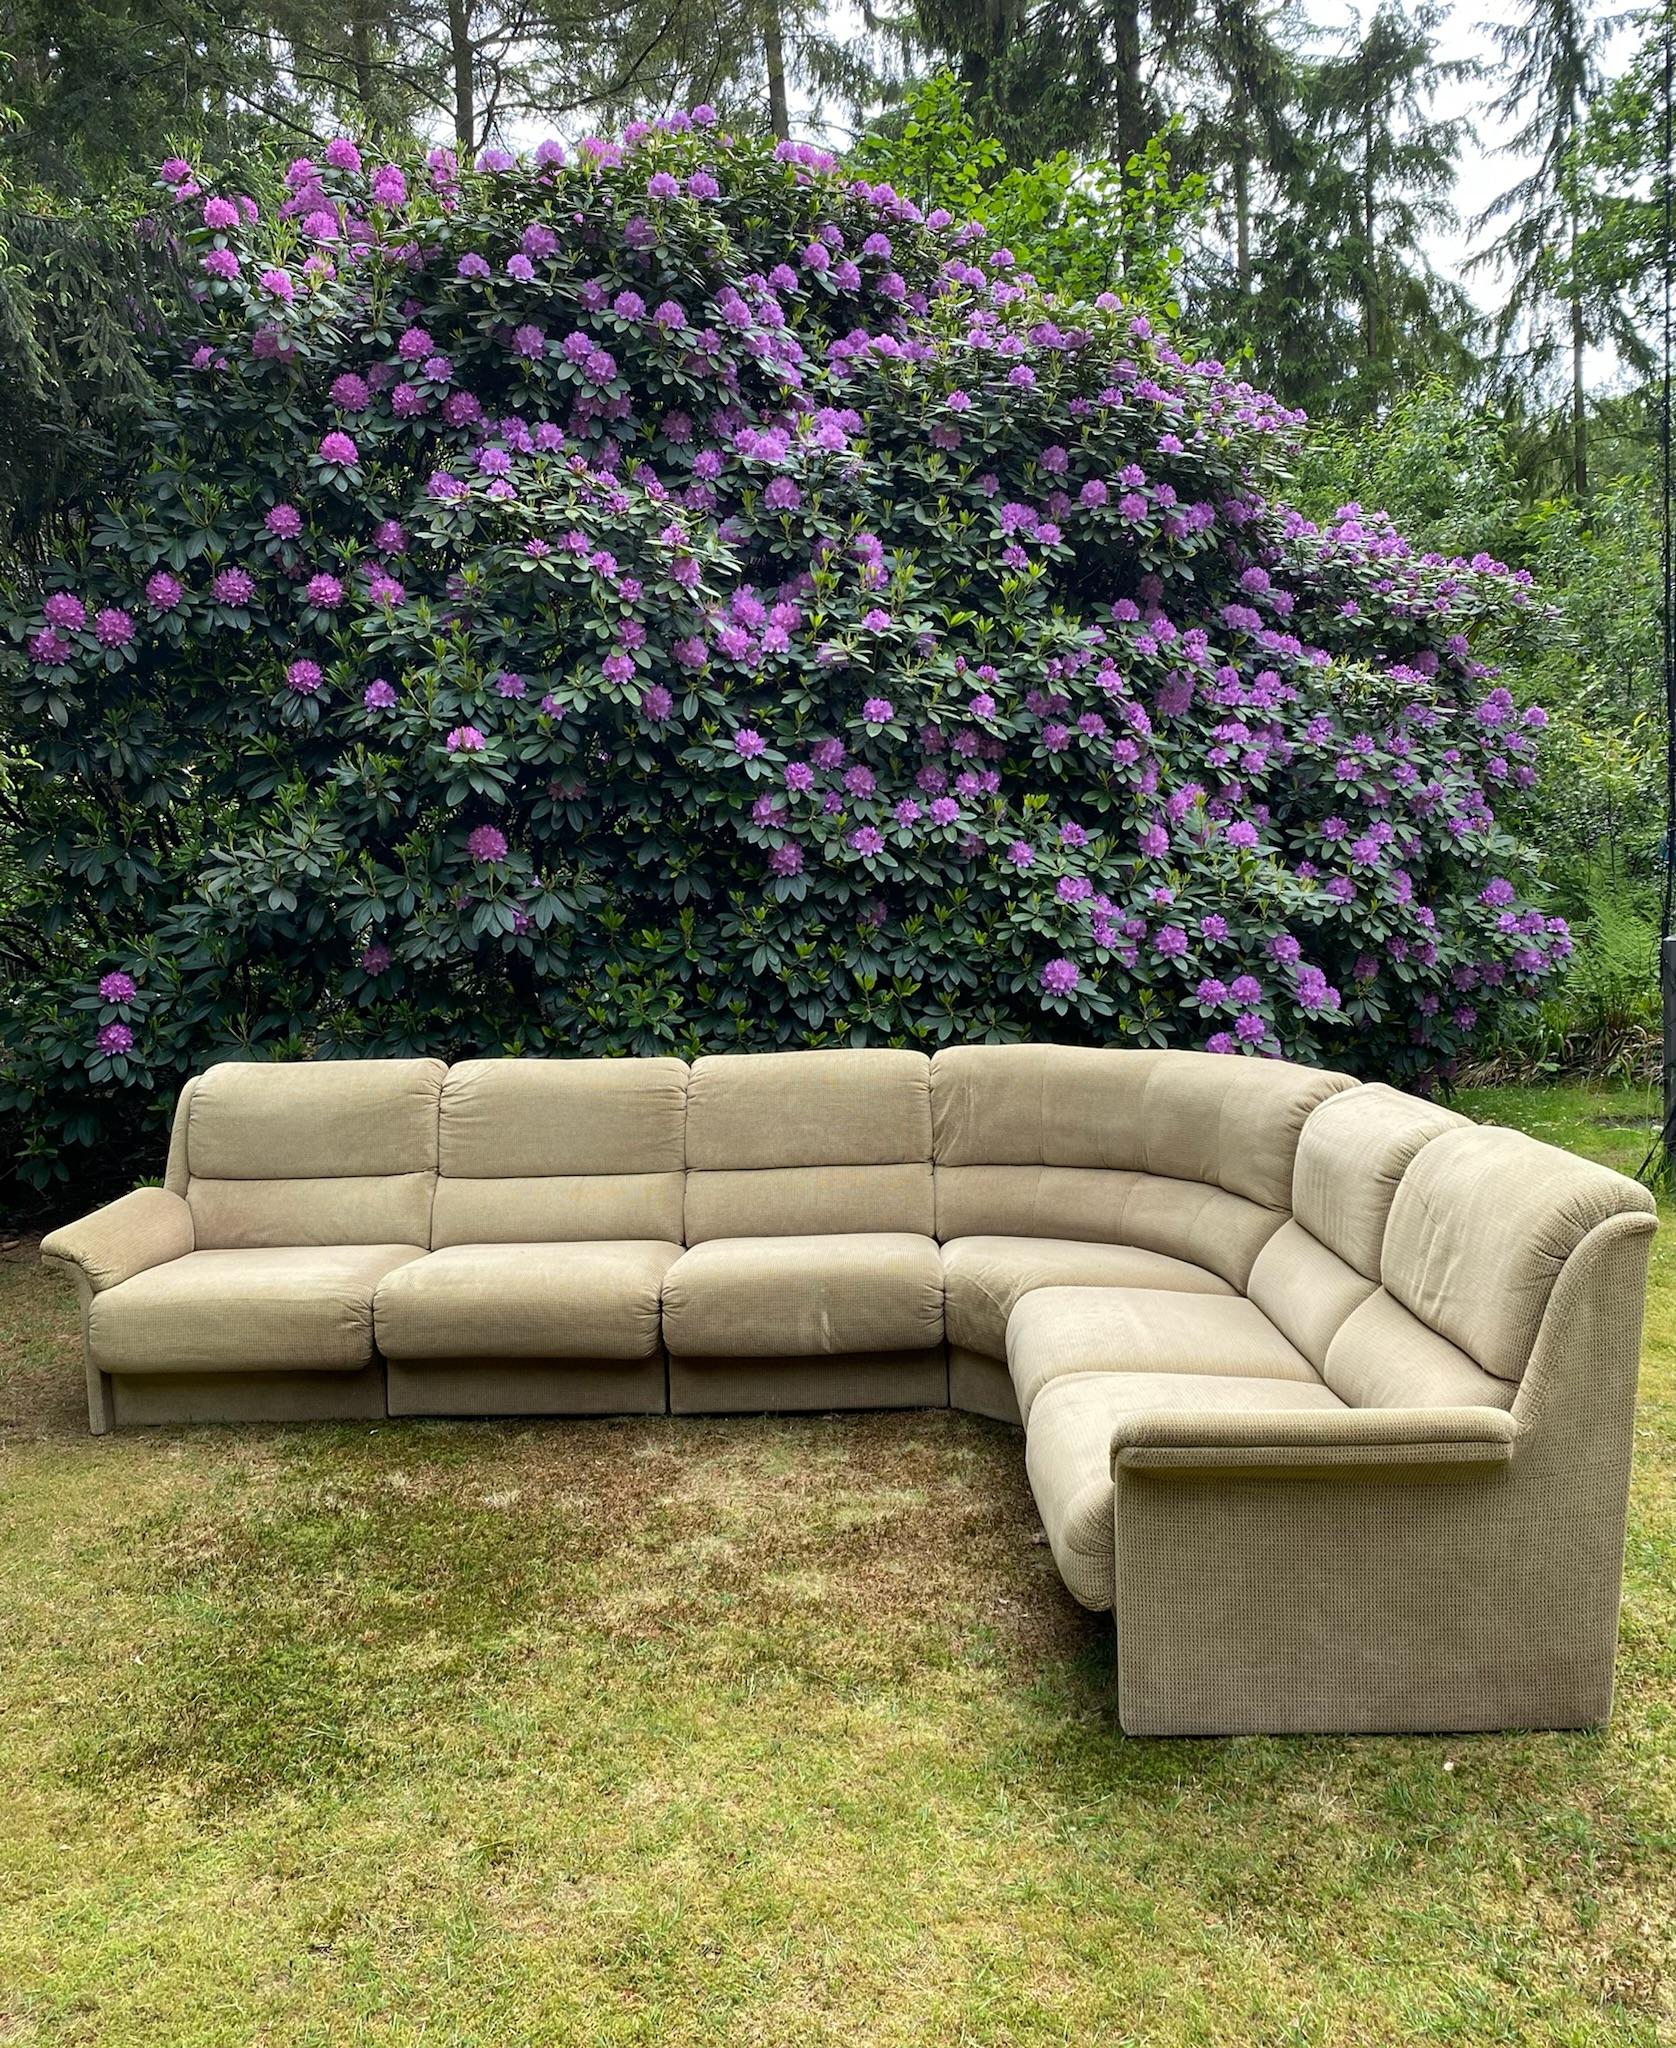 Wonderful comfortable sectional sofa, manufactured by Laauser Switzerland in ca. the 1960s. The sofa consists of six parts and comes with the original Green/Brown Velvel like fabric, which feels soft and offers good comfort. This modular piece